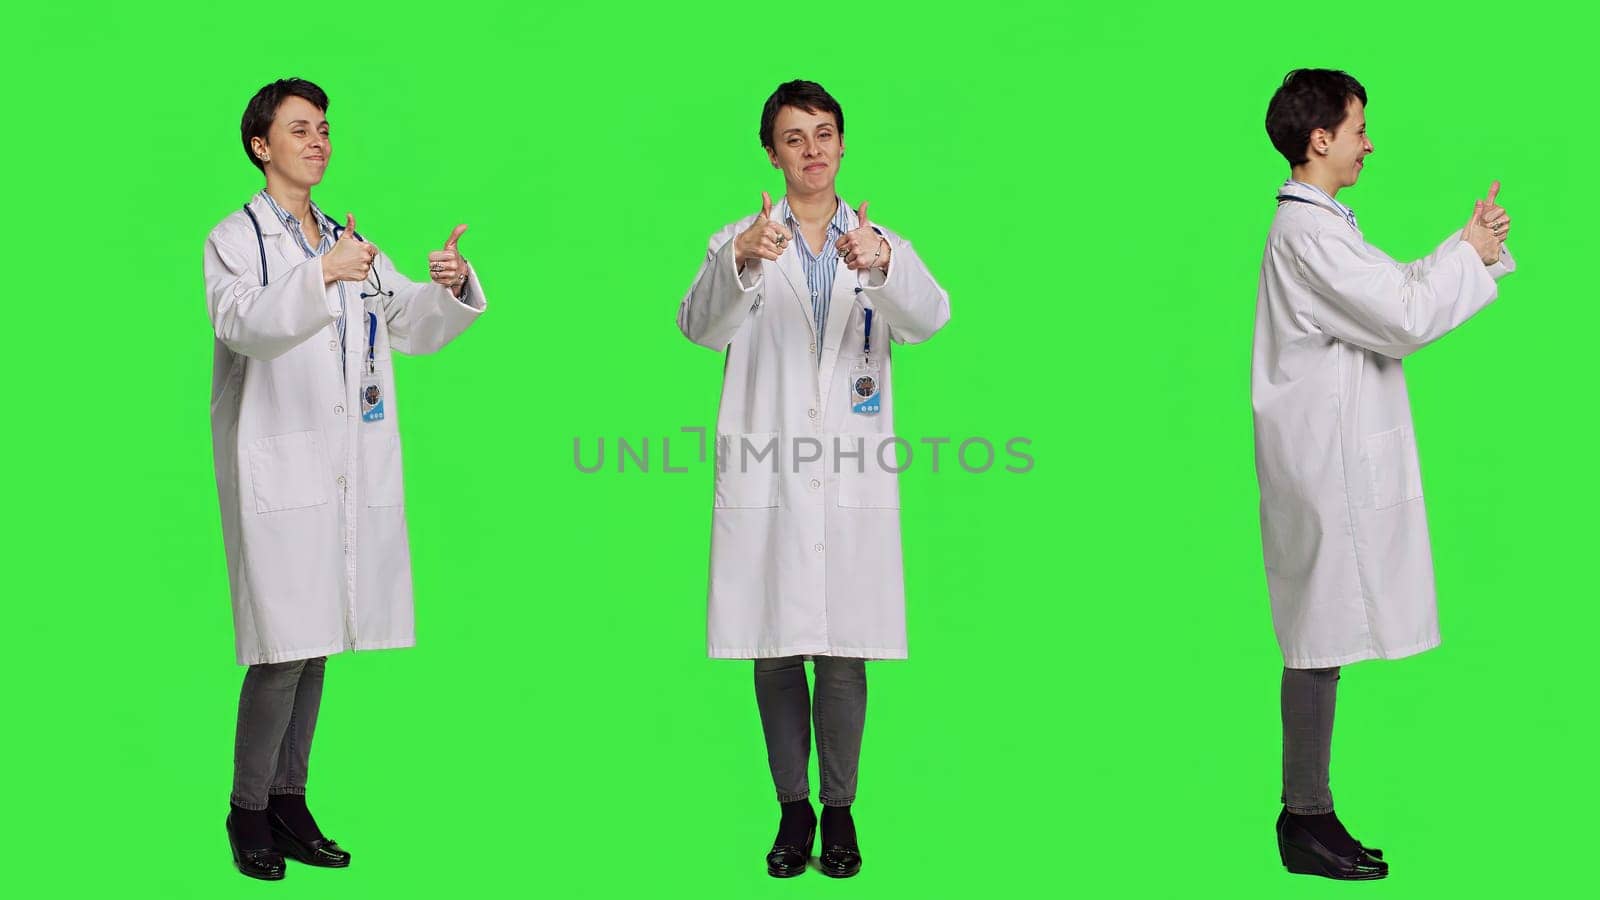 Cheerful medic doing thumbs up symbol against greenscreen backdrop by DCStudio